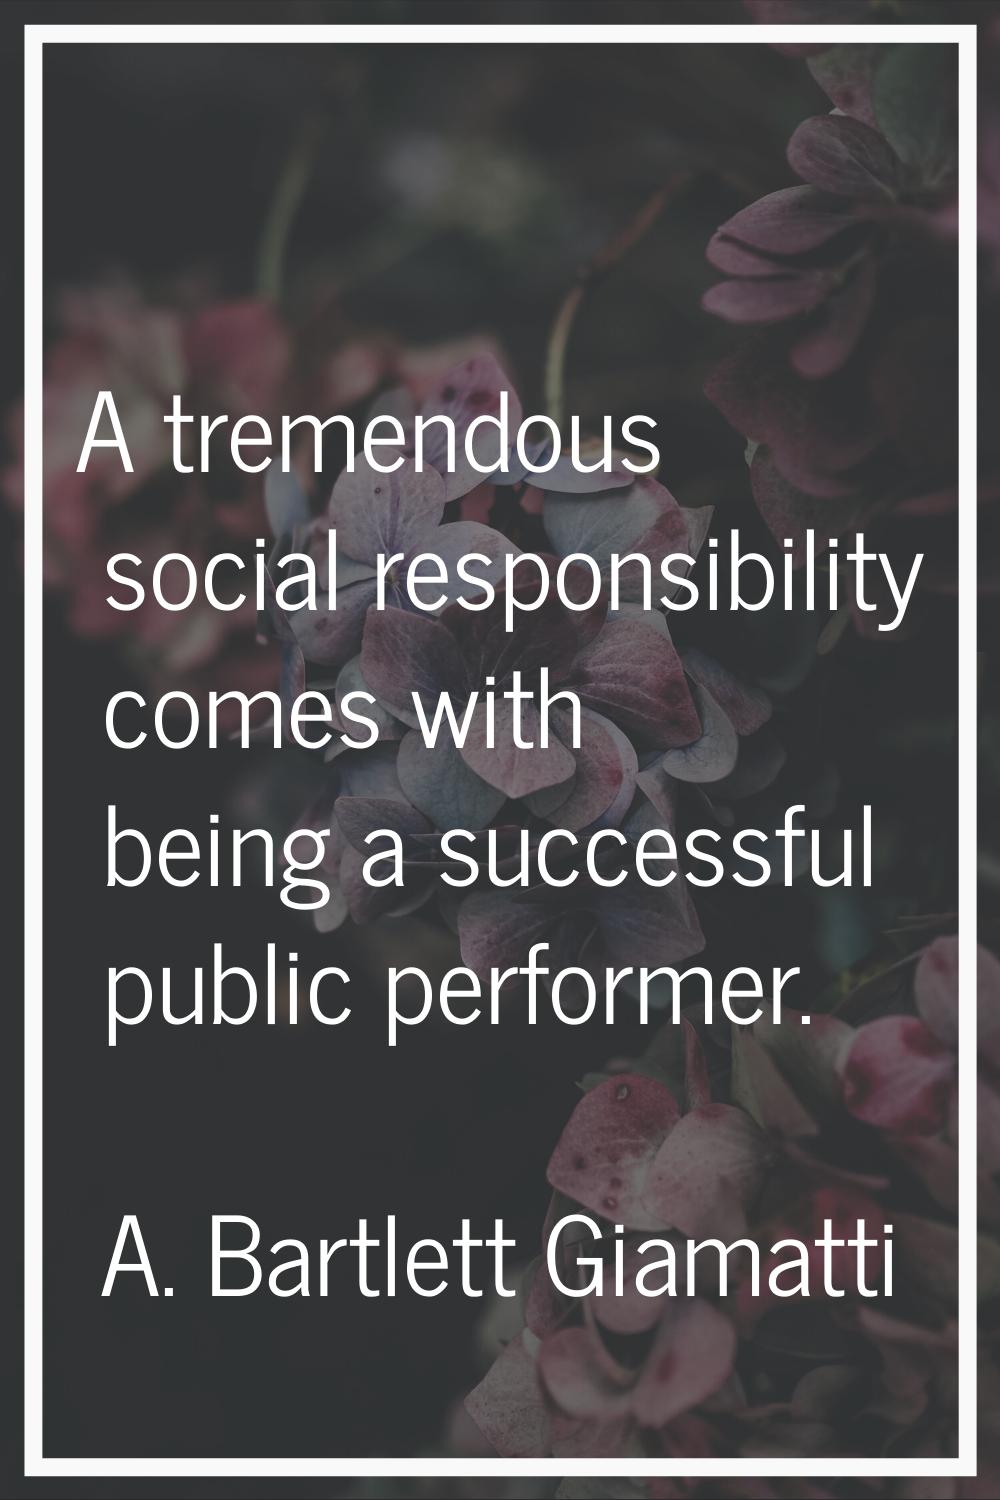 A tremendous social responsibility comes with being a successful public performer.